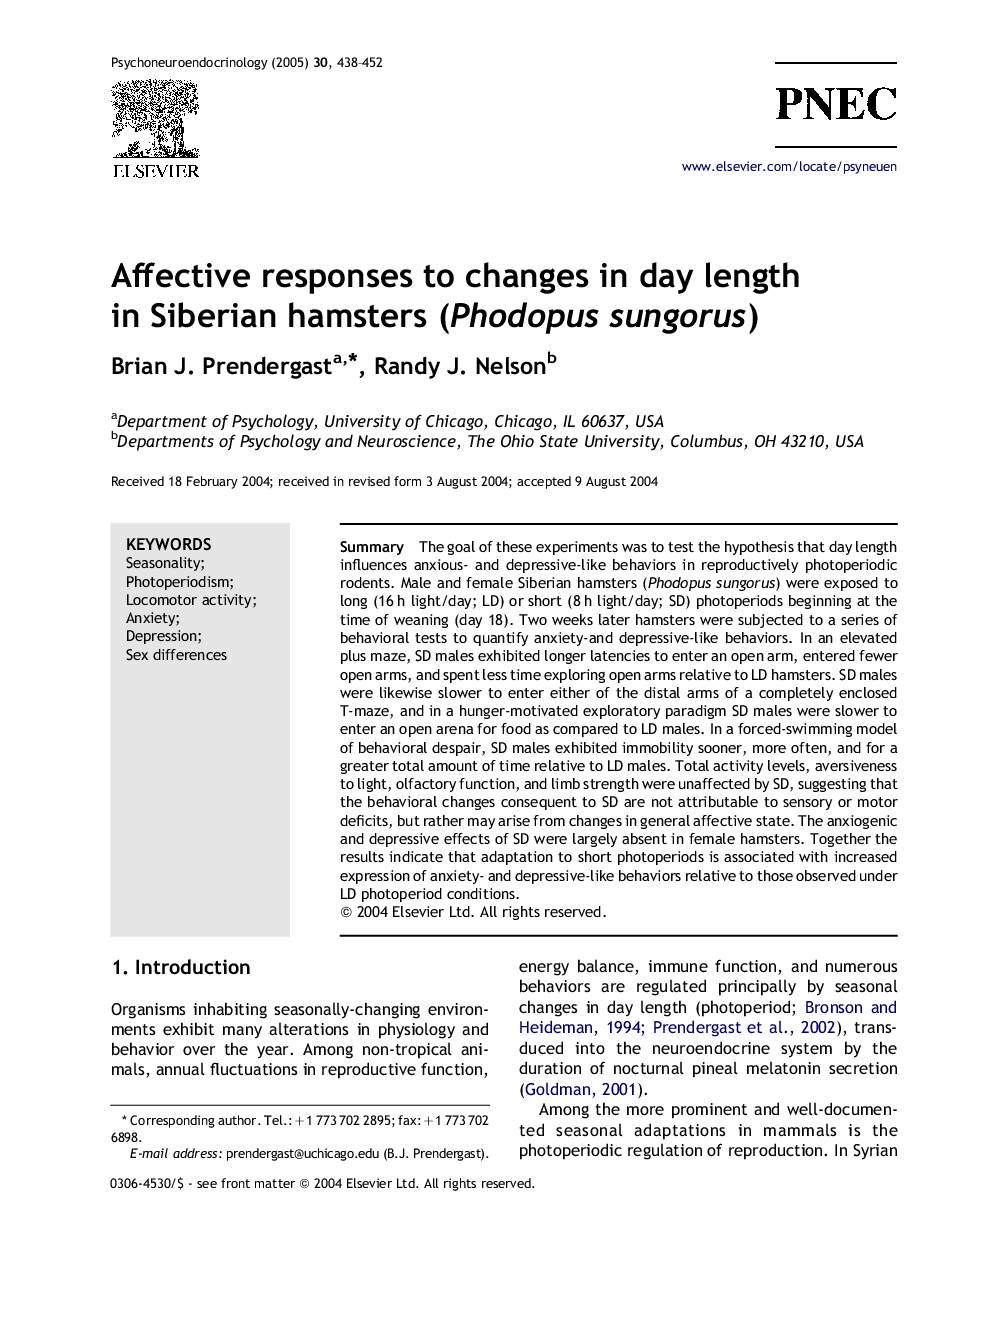 Affective responses to changes in day length in Siberian hamsters (Phodopus sungorus)